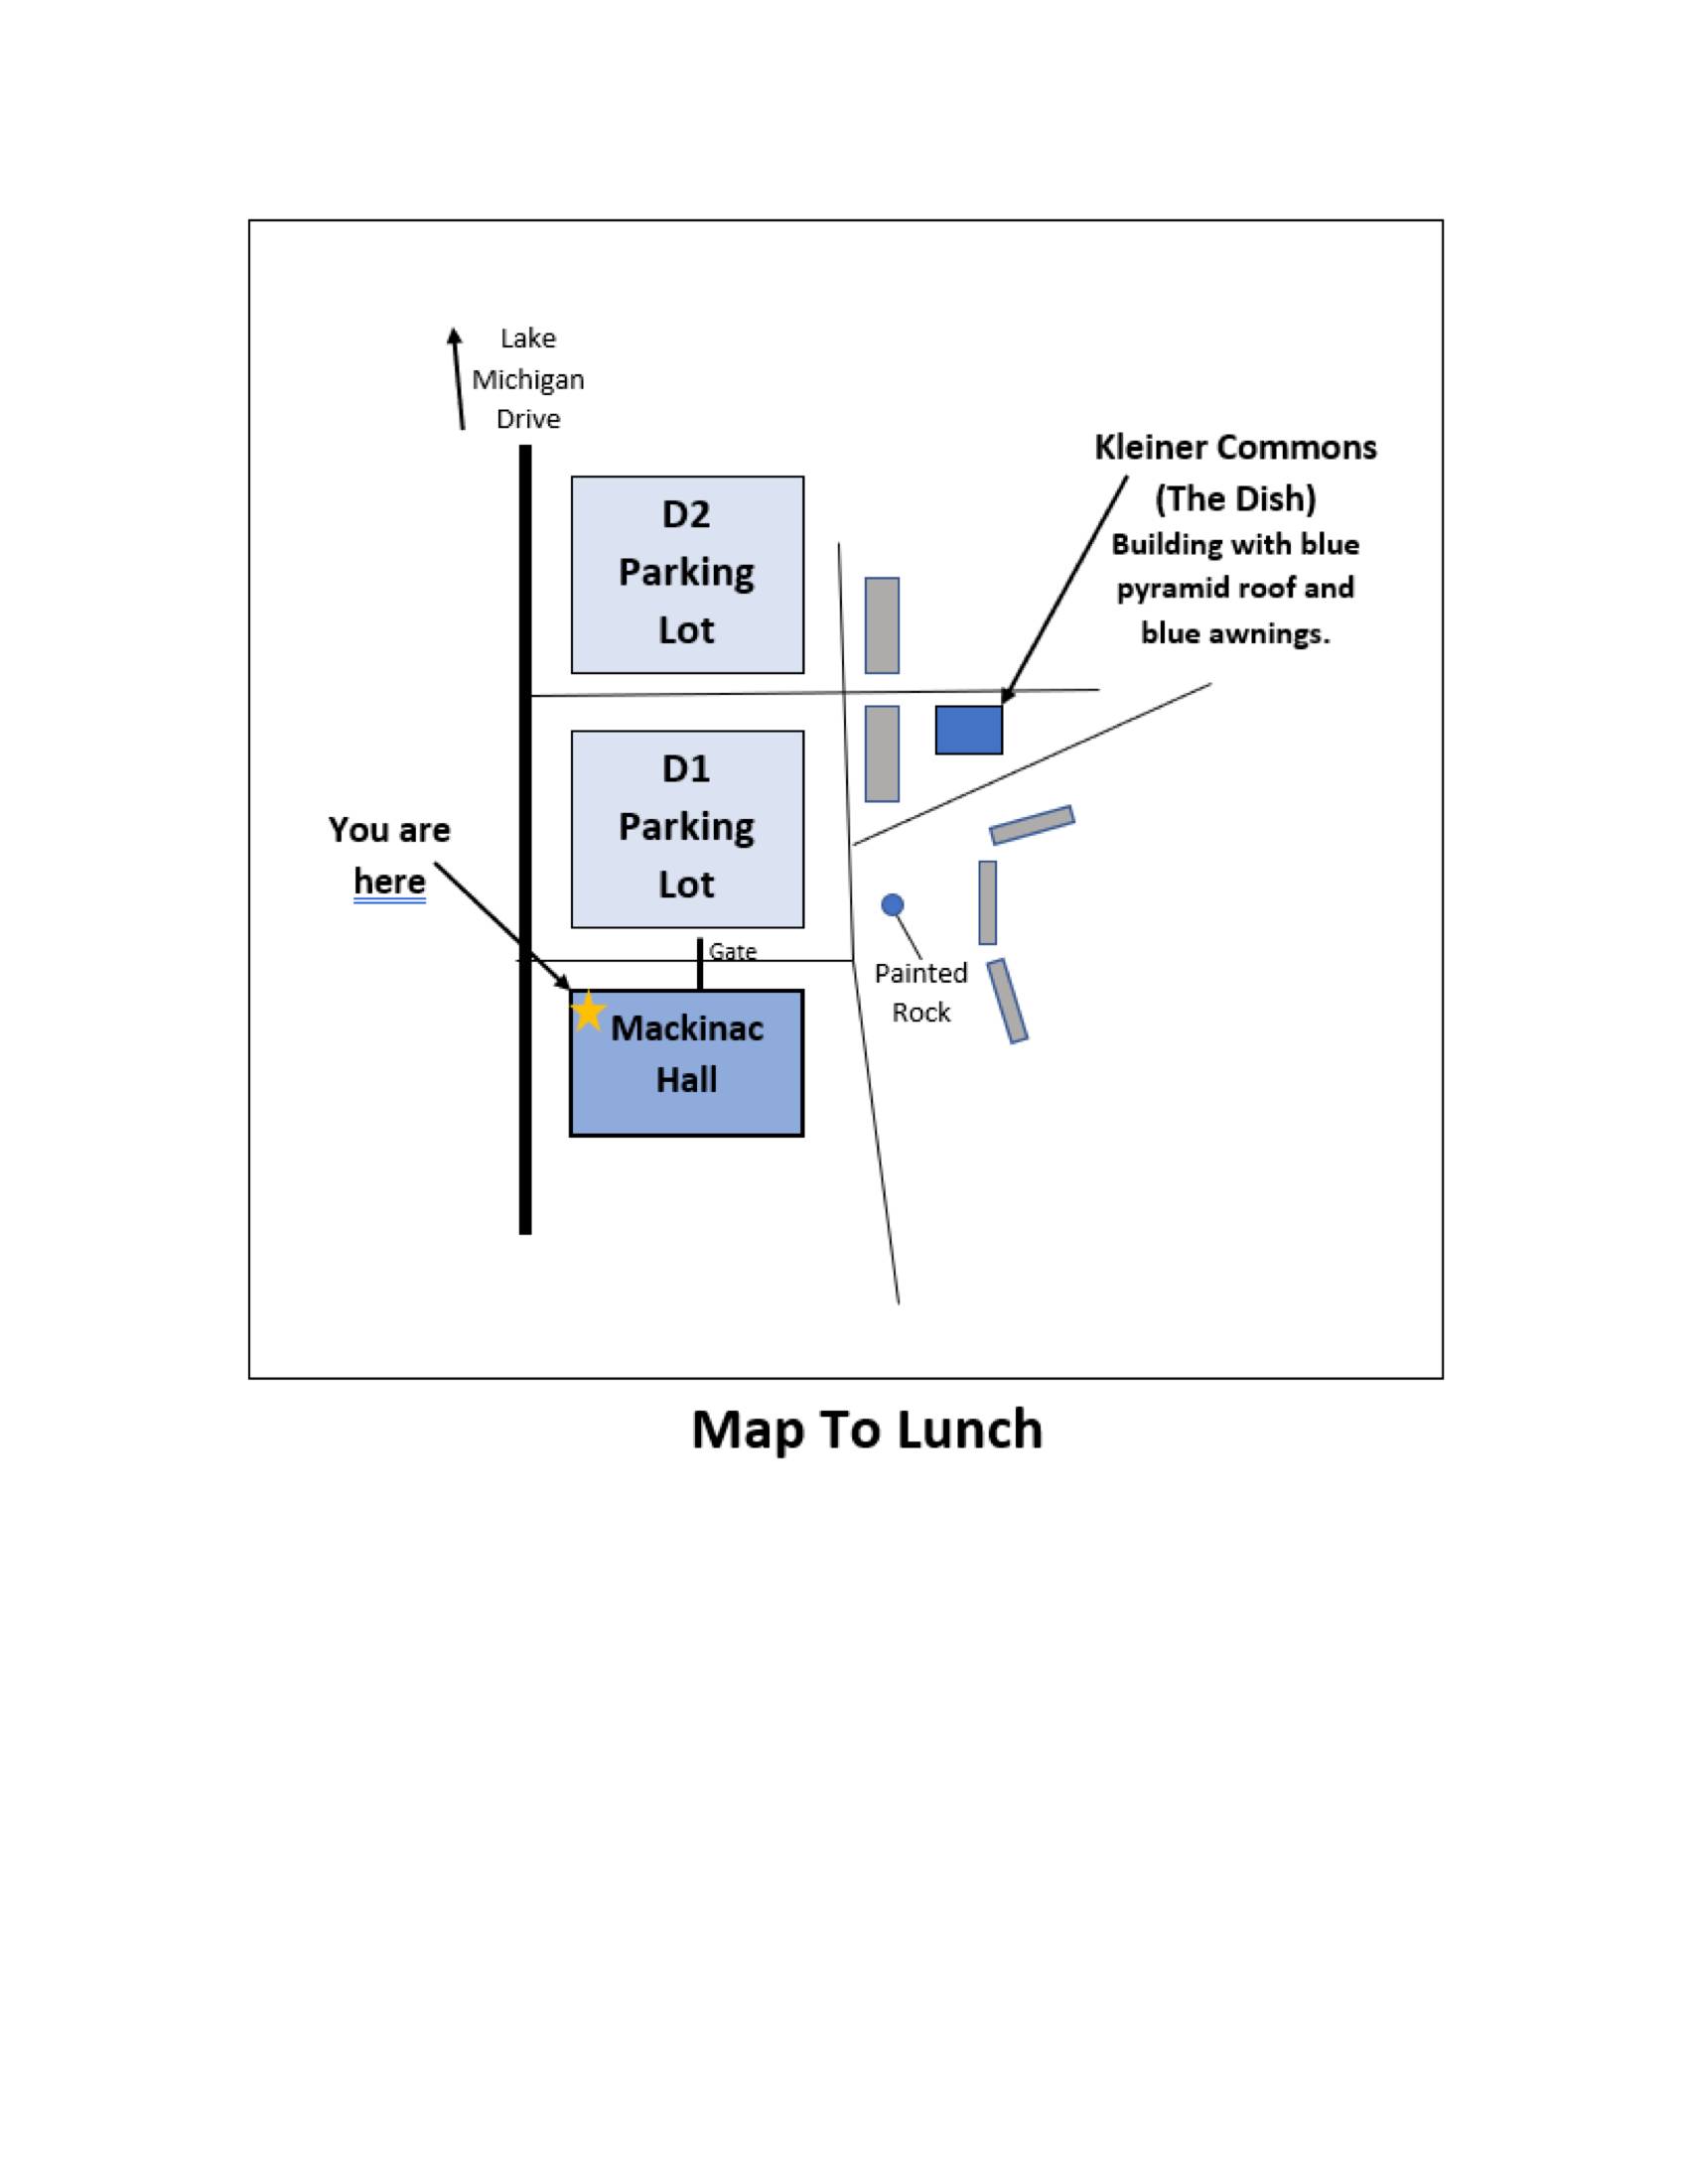 Map to Lunch